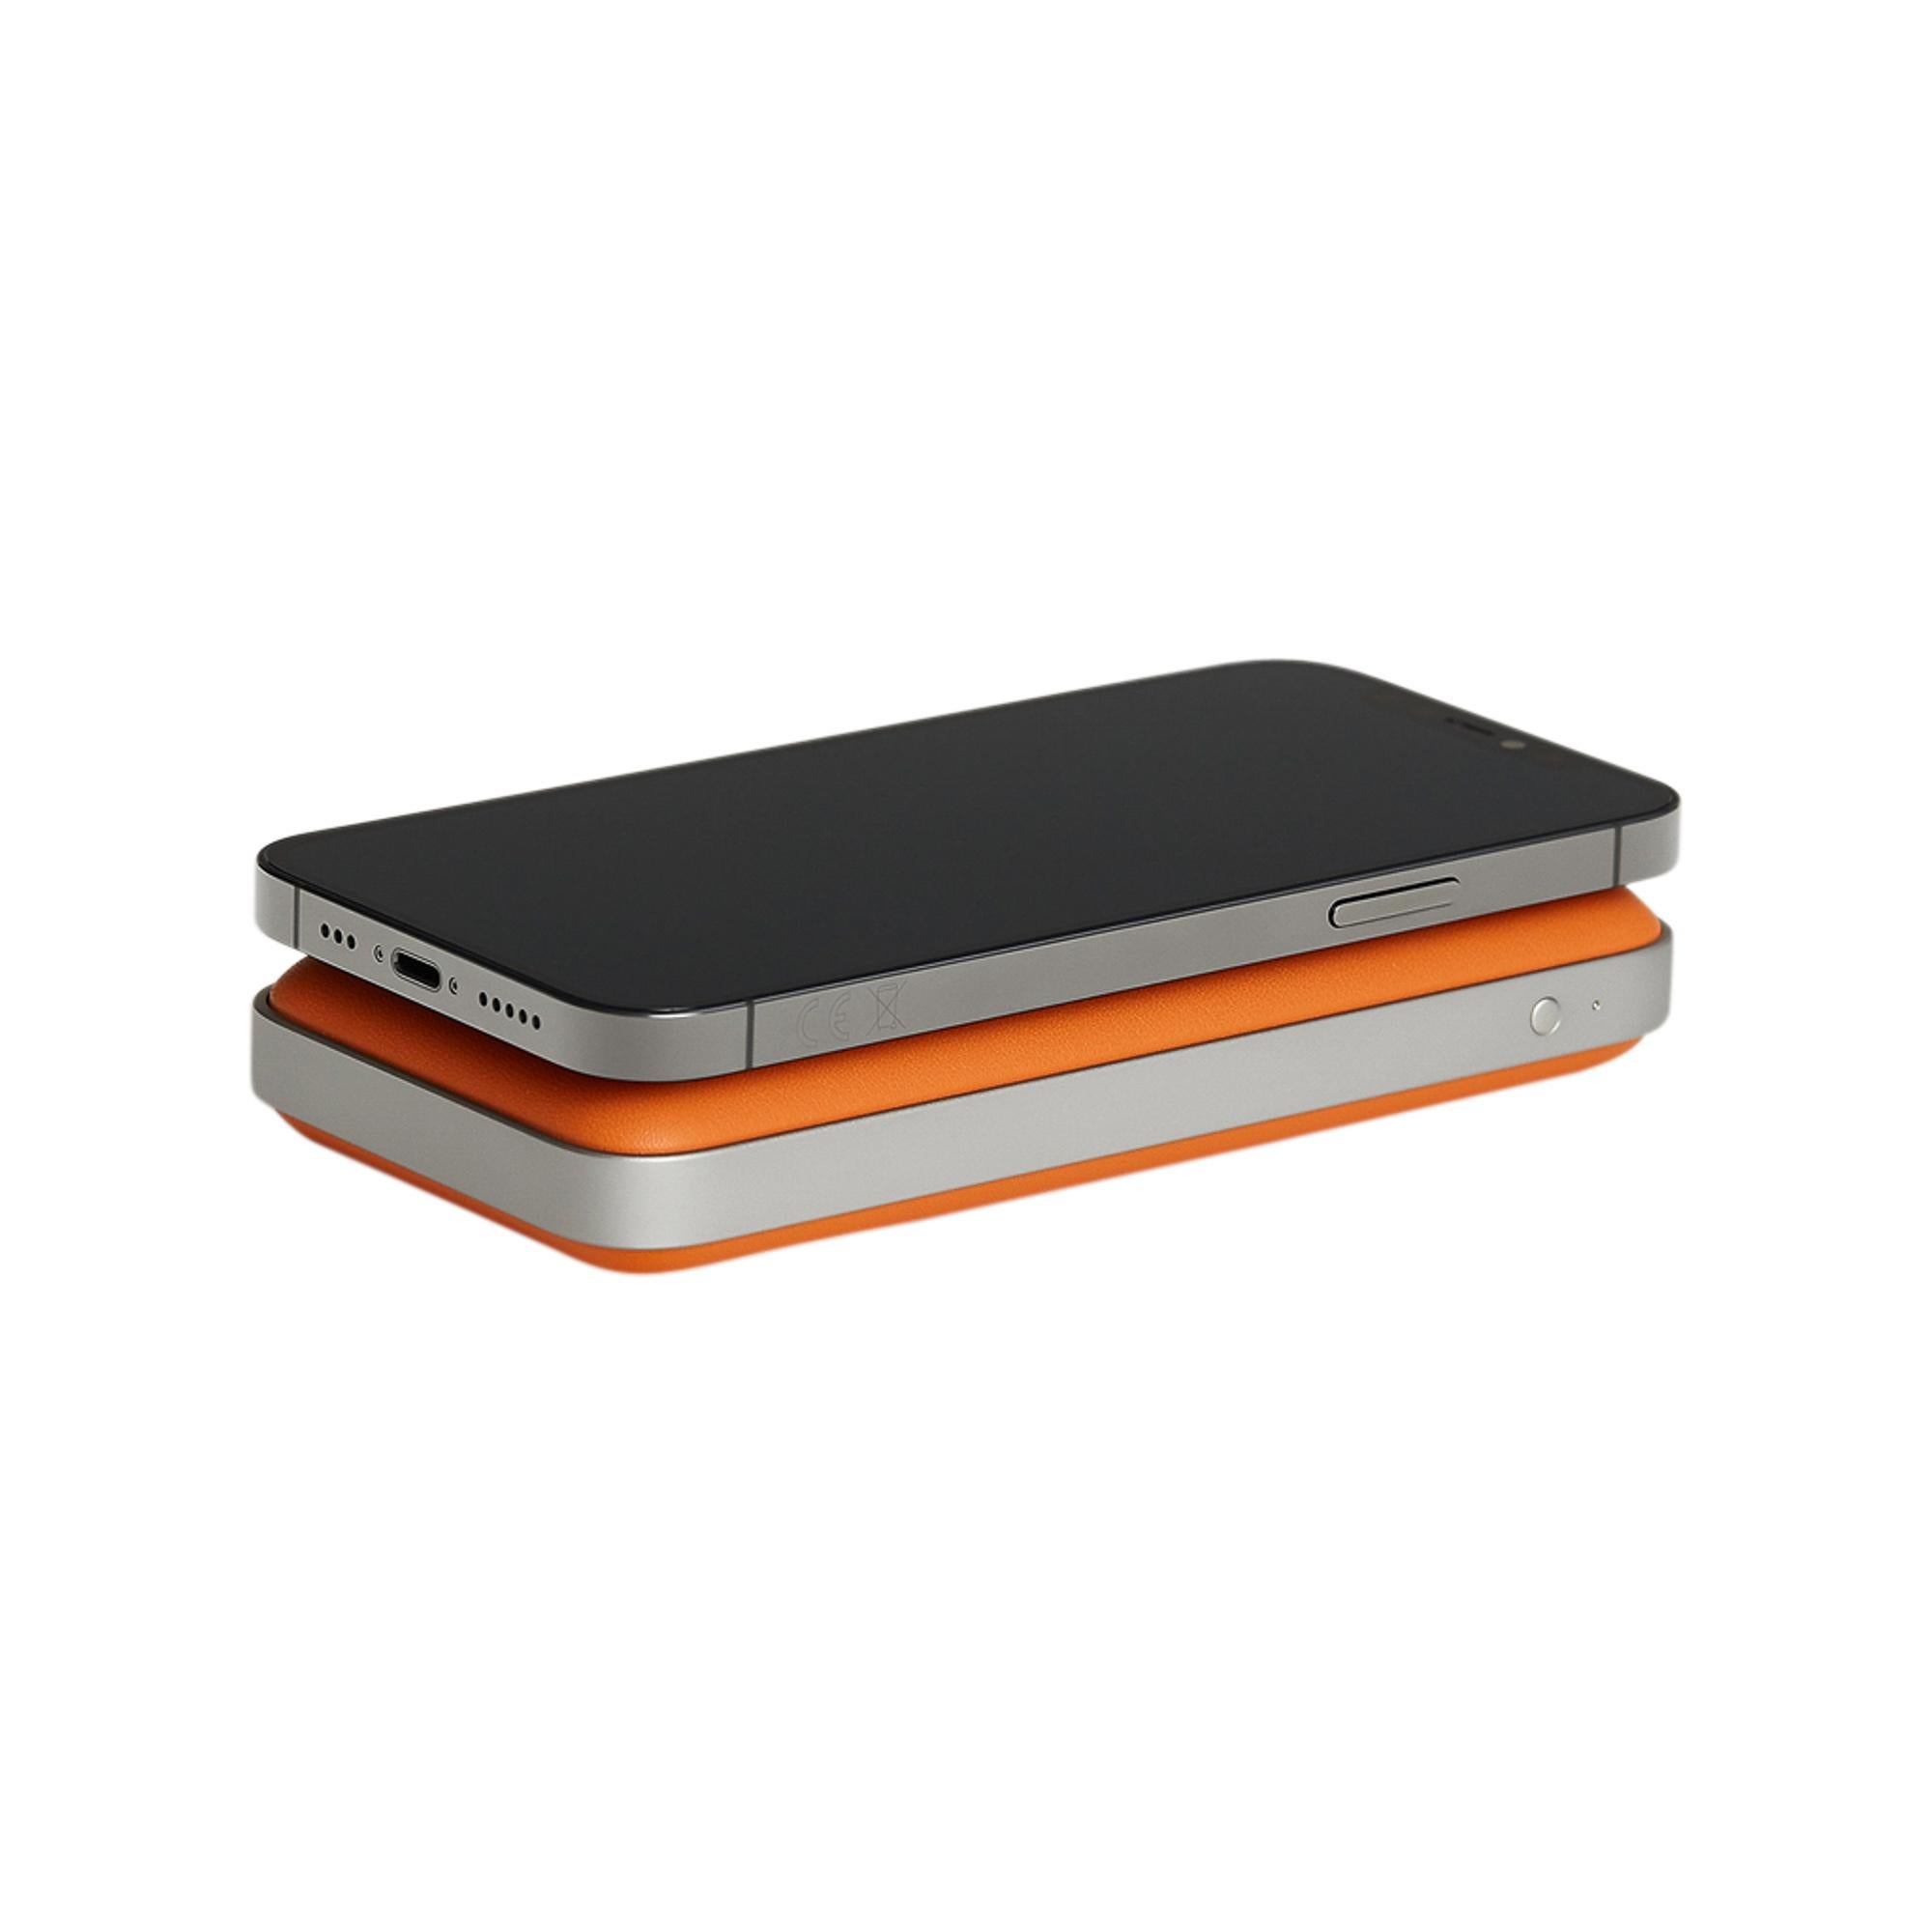 Mightychic offers an Hermes Volt'H Maxi Power Bank featured in Orange.
Swift leather and aluminum.
Cable free energy boost for your devices.
Place your Qi-enabled onto the charging surface.
You can charge two devices simultaneously.
The enclosed